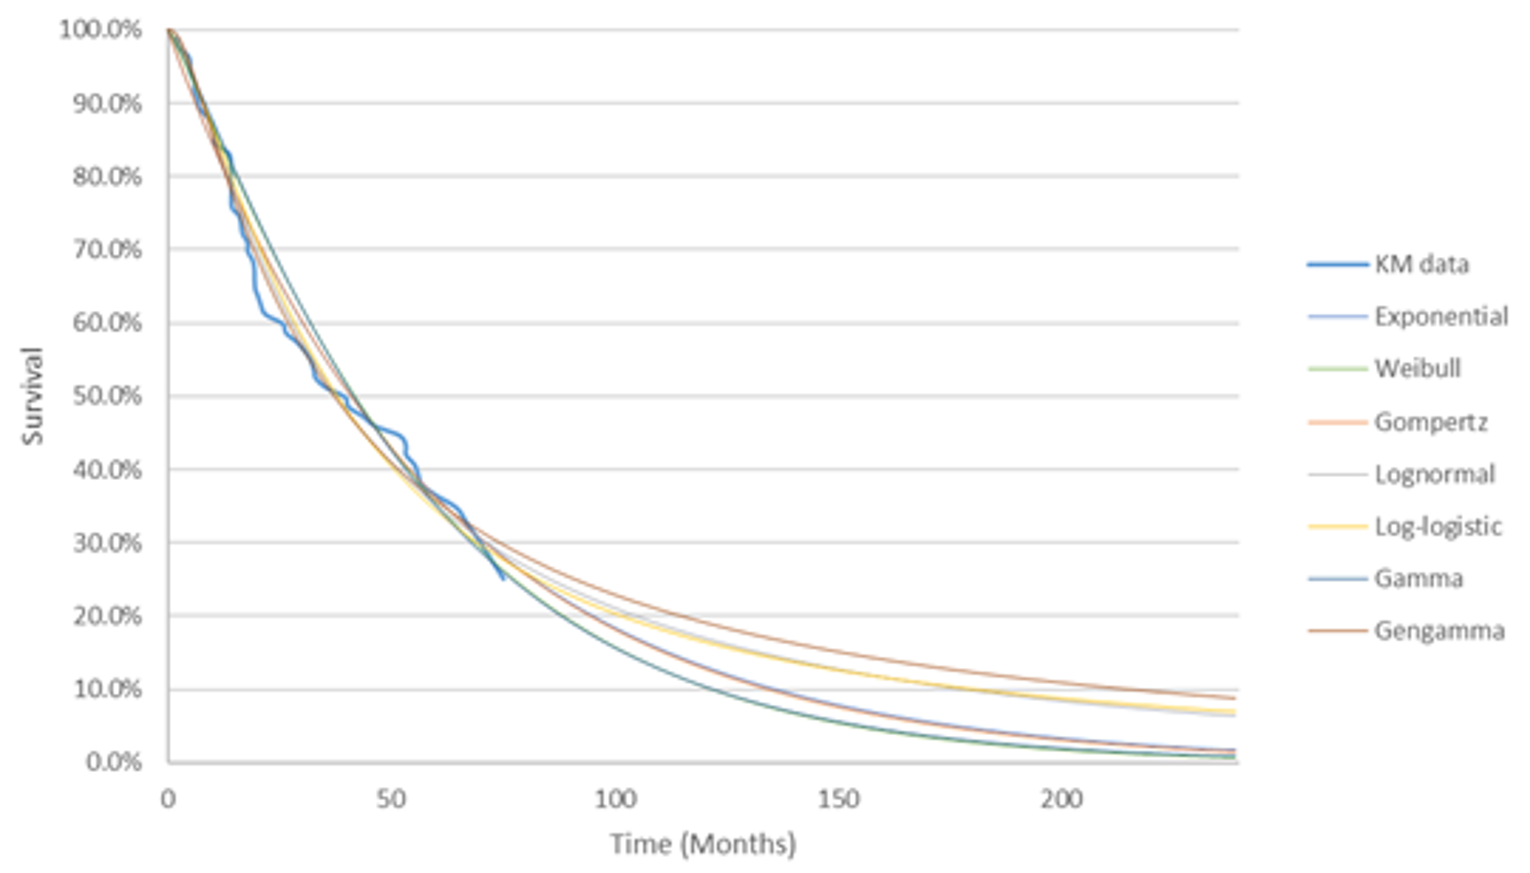 Line chart graphing overall survival on the y-axis (0% to 100%) and time in months on the x-axis (0 months to 200 months). Each line represents differing extrapolation techniques using distributions such as exponential, Weibull, Gompertz, lognormal, log-logistic, gamma, or generalized gamma. Overall survival starts at 100% at time zero and drops to approximately 40% by 50 months on the curve. The curves begin to differentiate by 100 months, and by 200 months the overall survival varies from approximately 2% to 12%.